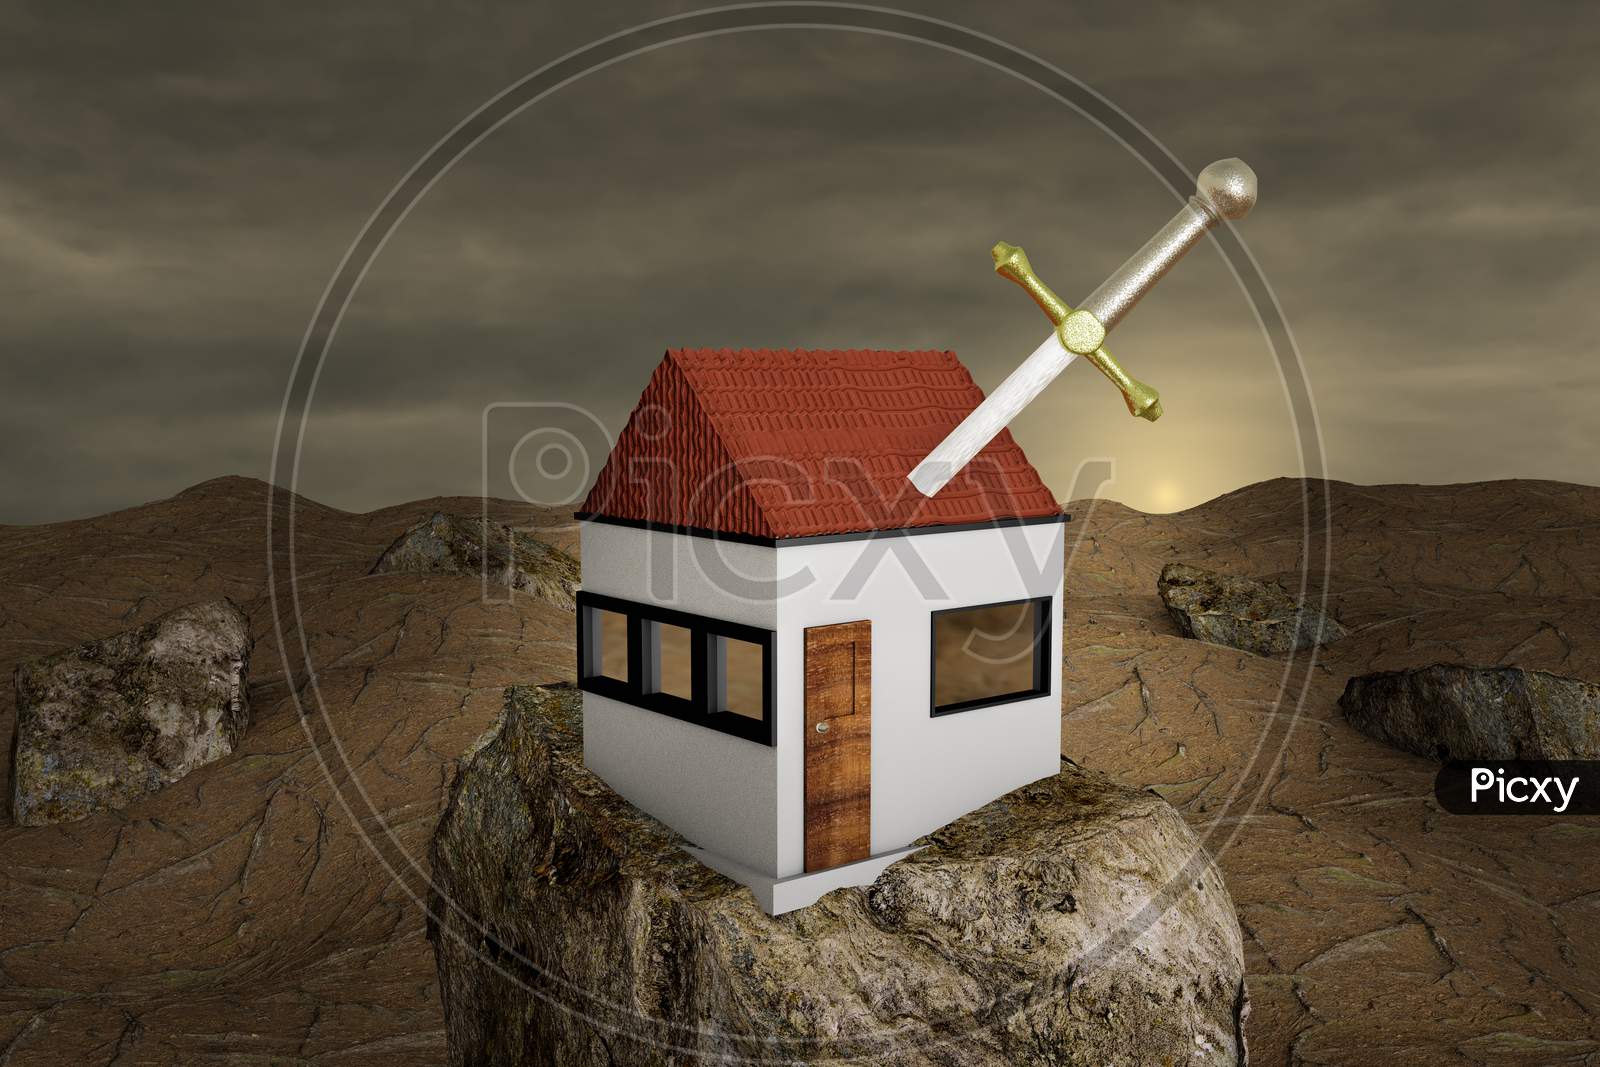 Excalibur In House On Stone At Sunset Day. Real Estate Agent Or Independent Contractor Or Develop A Business Plan Or Business Expenses Concept. 3D Illustration